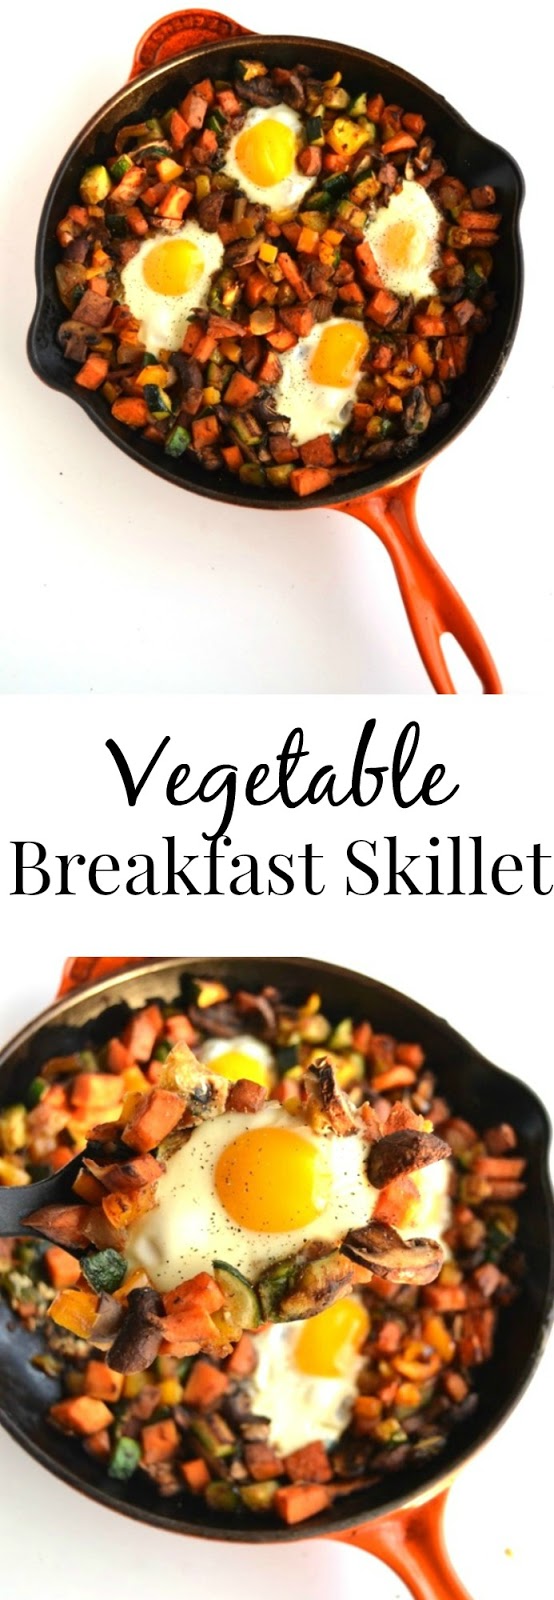 This vegetable breakfast skillet is packed full of nutritious vegetables and baked eggs for the perfect start to your day!